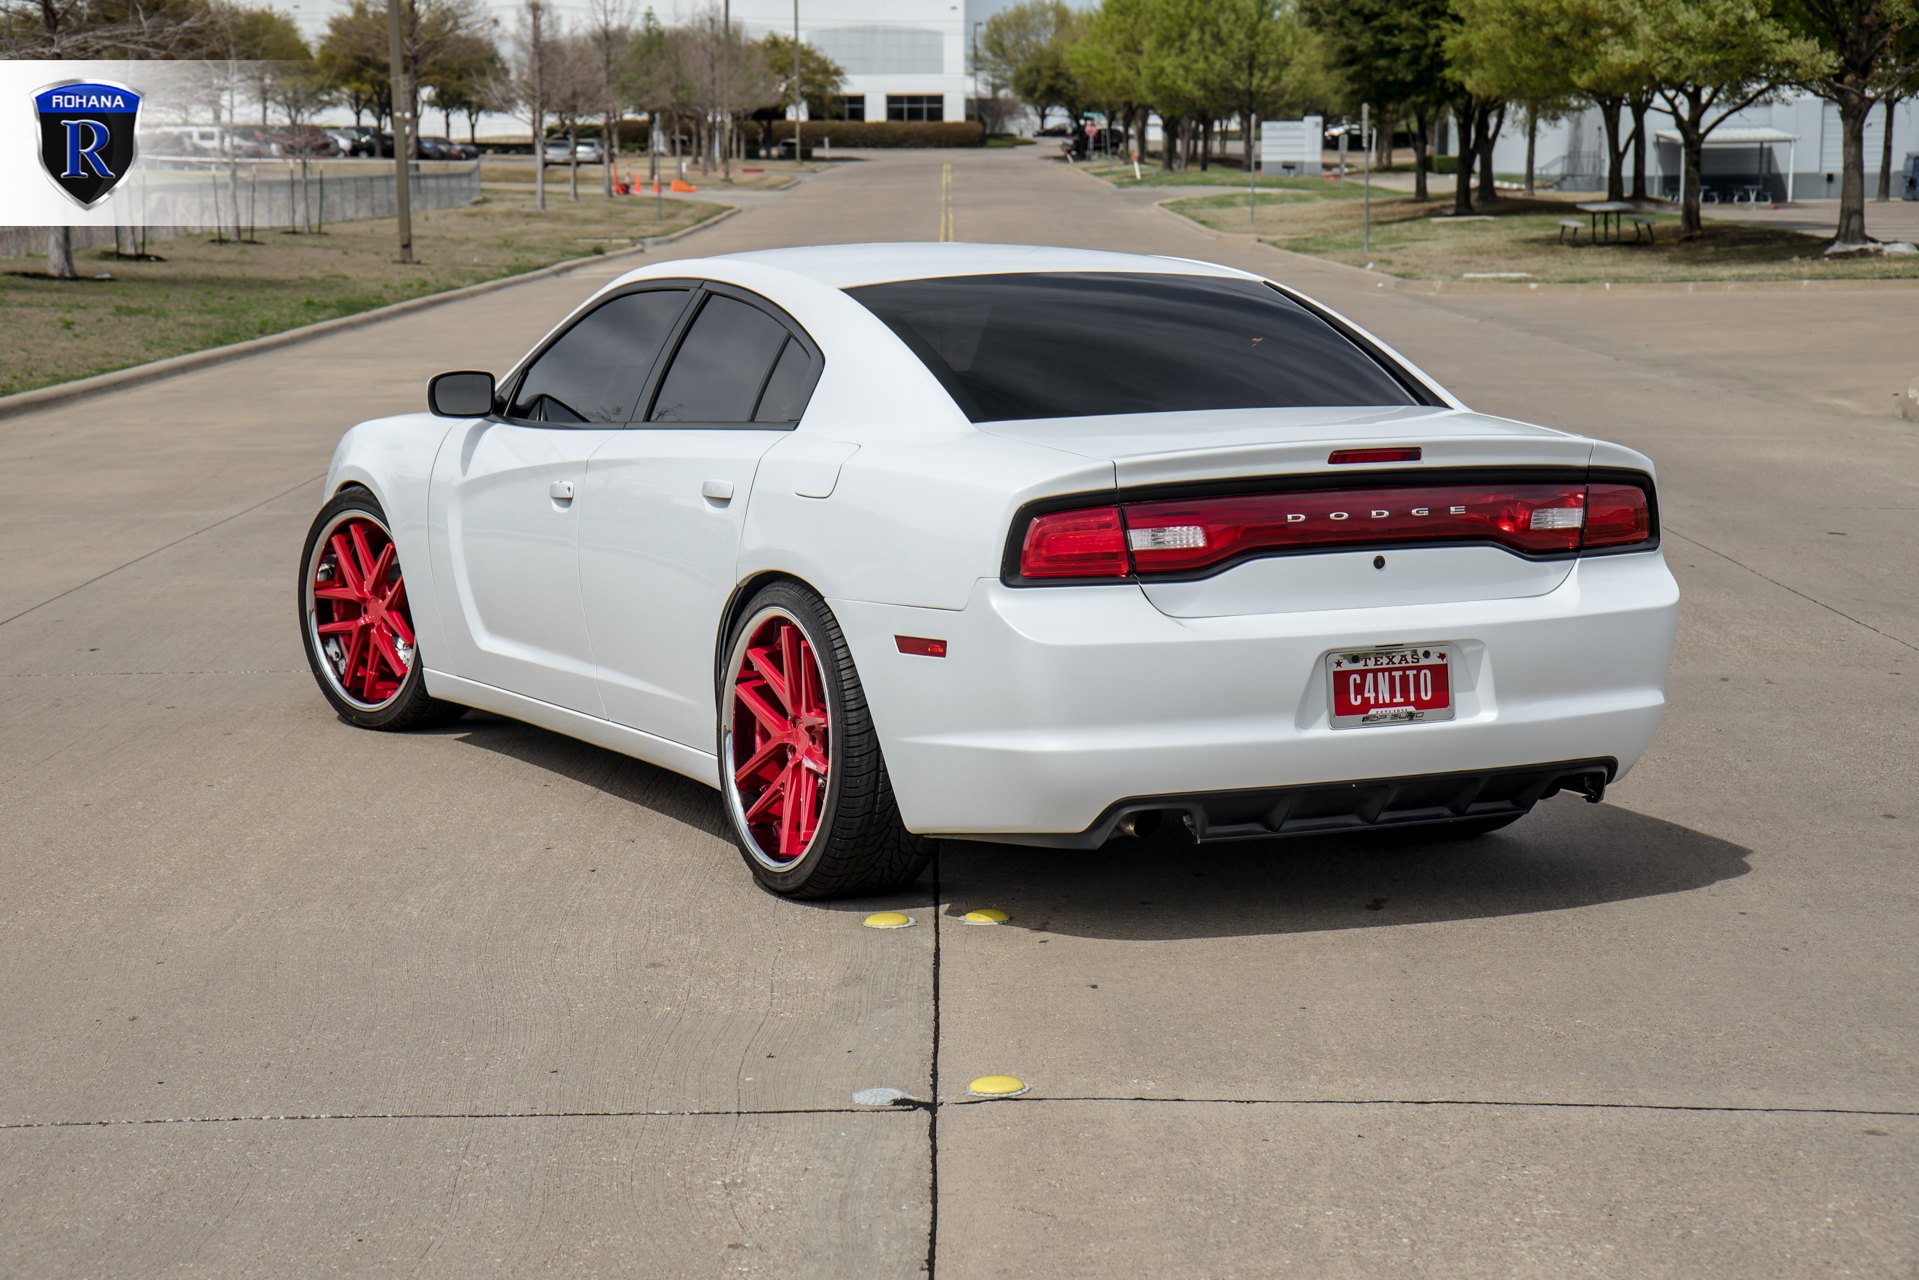 White Dodge Charger with Aftermarket LED Taillights - Photo by Rohana Wheels